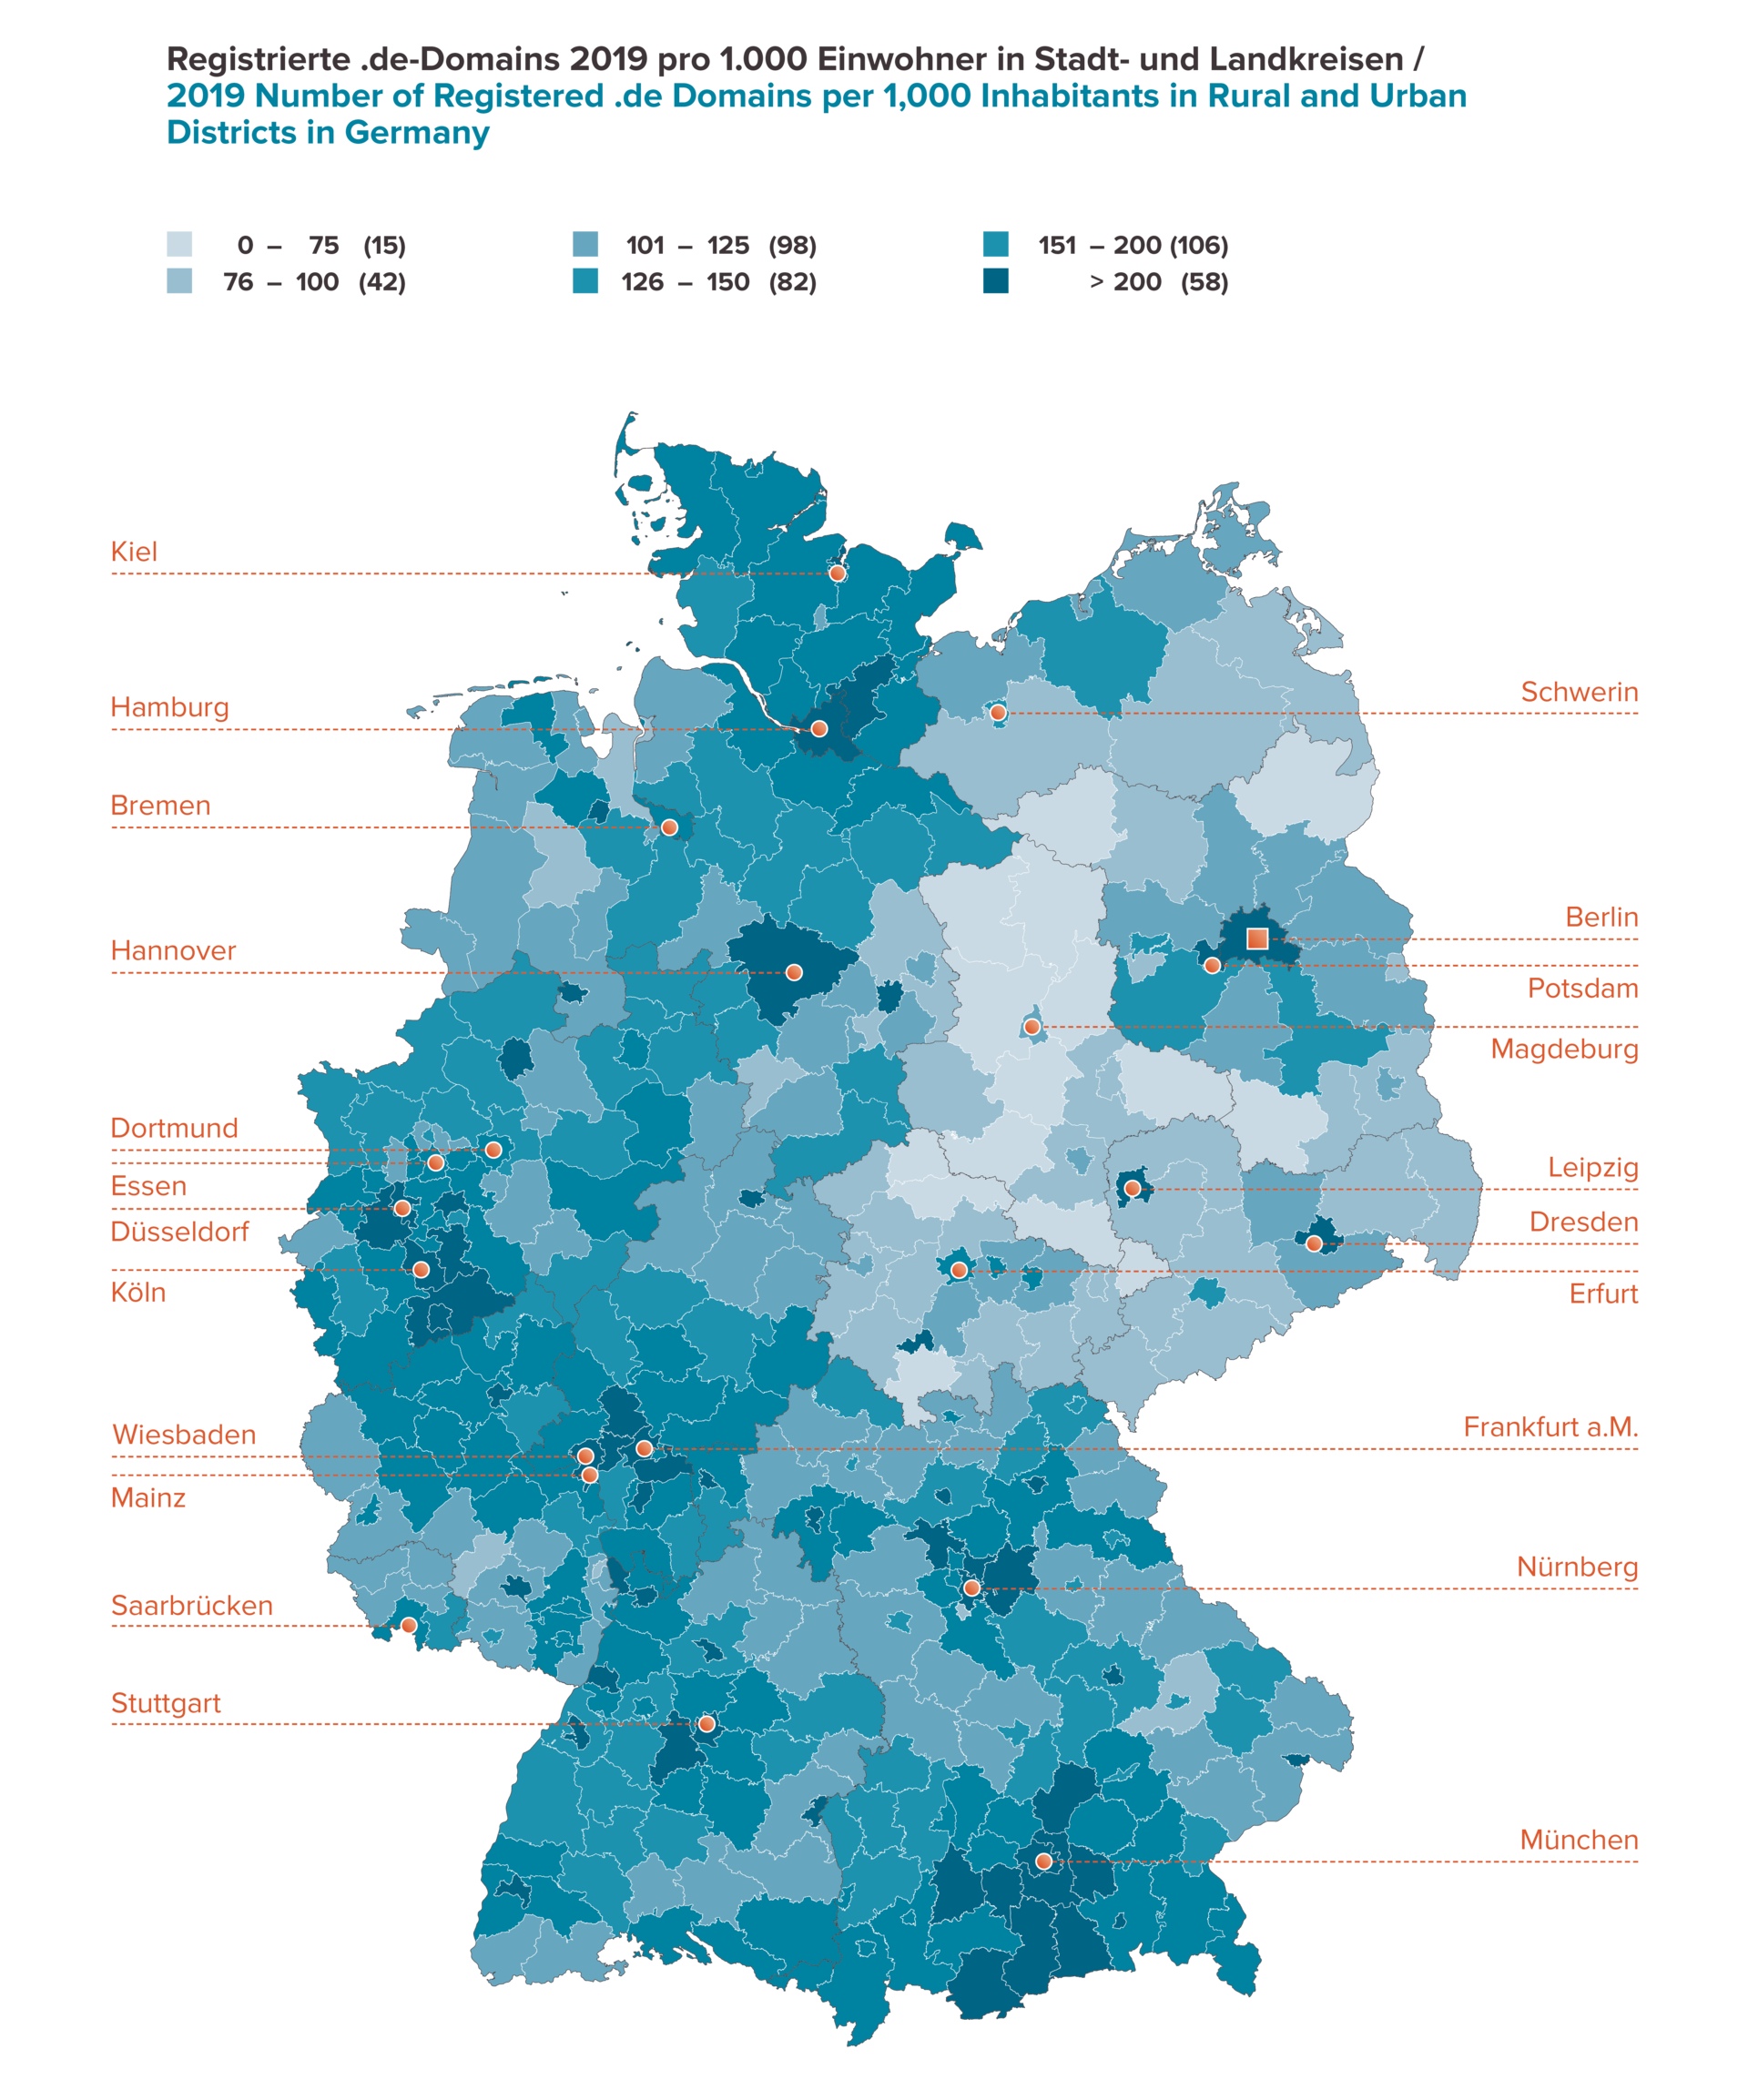 Number of Registered .de Domains per 1,000 Inhabitants in Rural and Urban District in Germany 2019